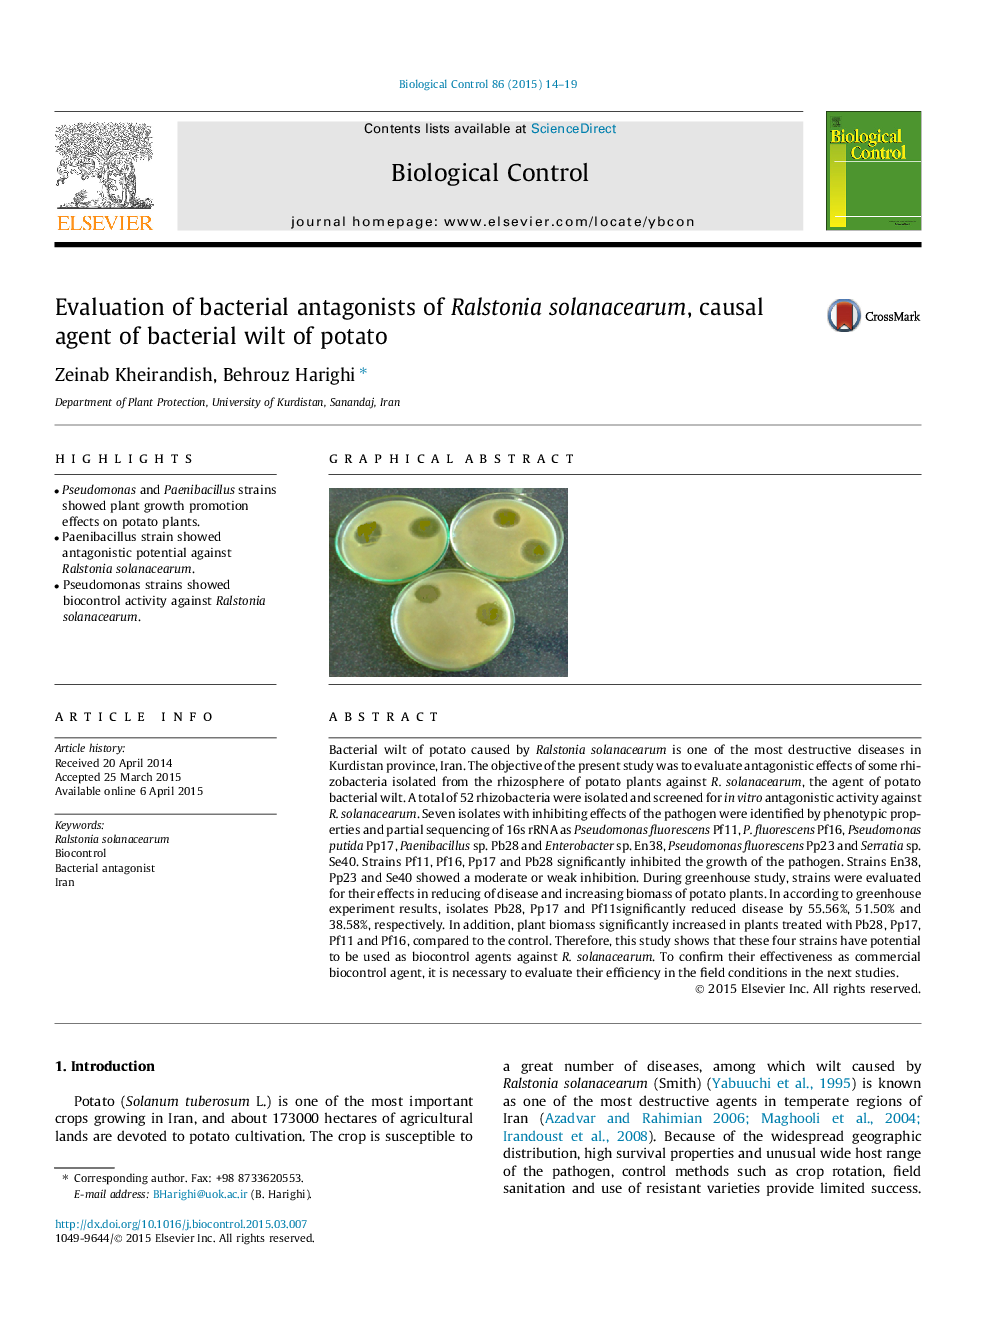 Evaluation of bacterial antagonists of Ralstonia solanacearum, causal agent of bacterial wilt of potato